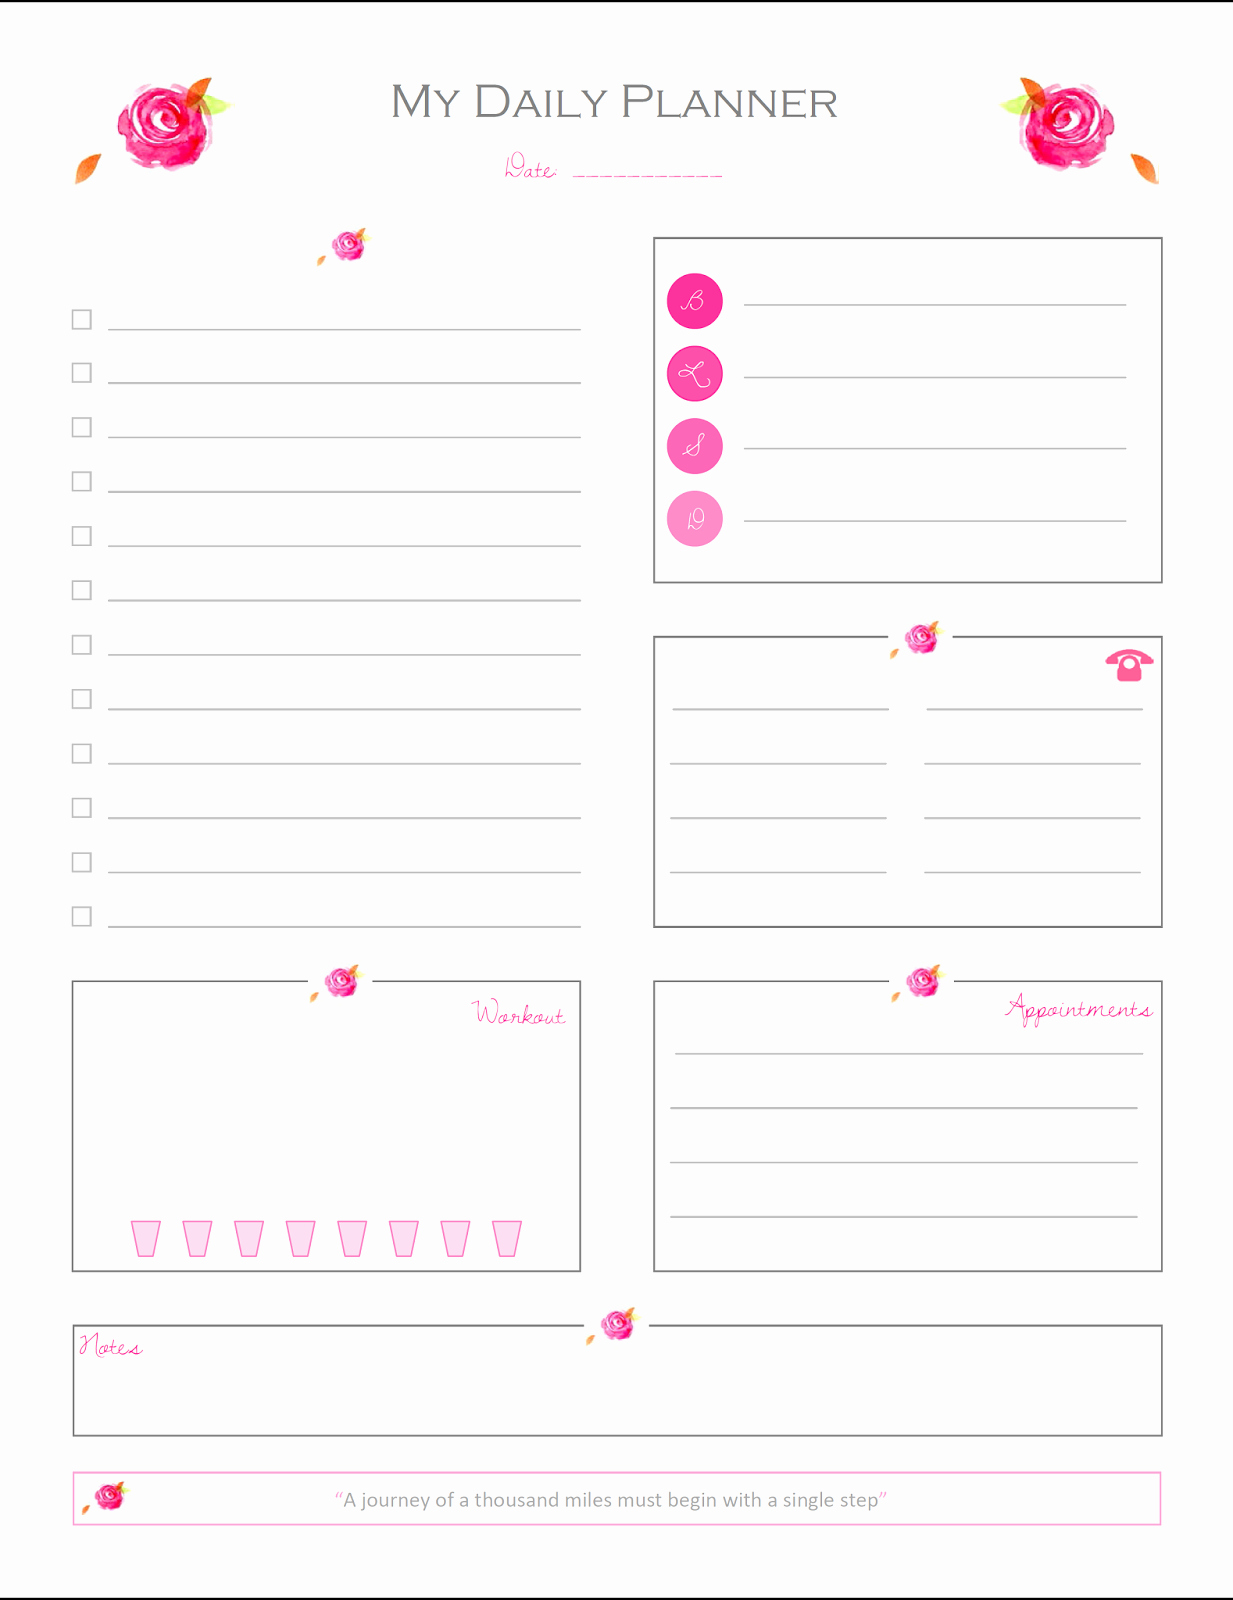 Weekly Planner Template Pdf Awesome Made In Craftadise